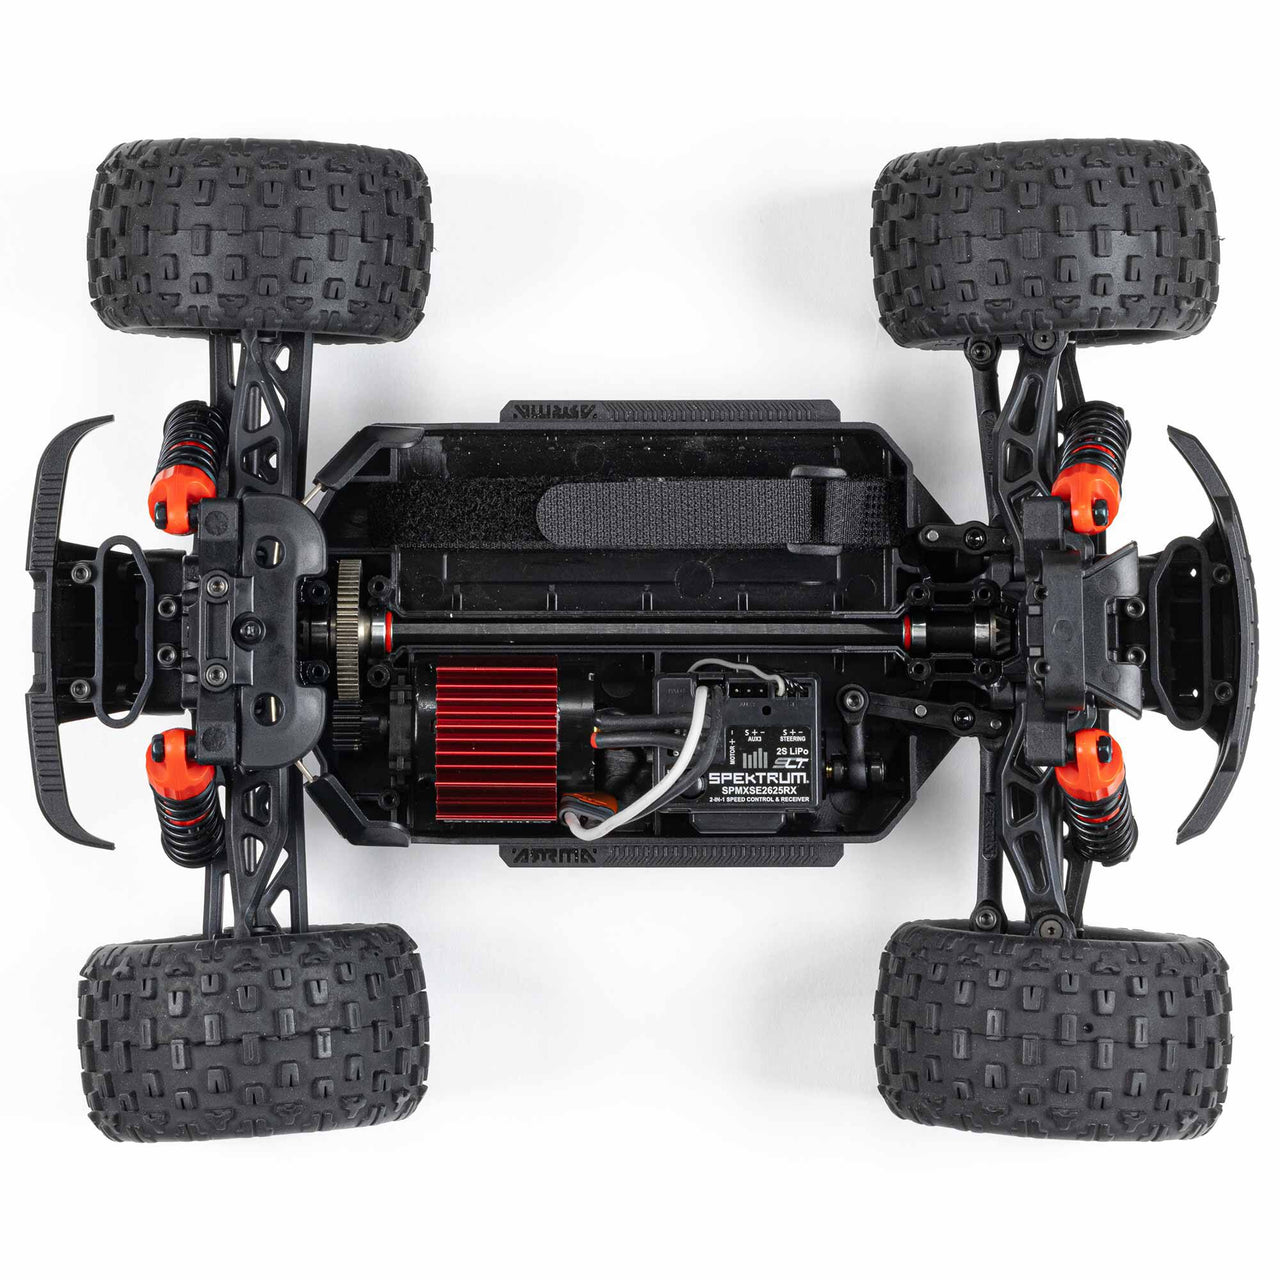 ARA2102T2 1/18 GRANITE GROM MEGA 380 Brushed 4X4 Monster Truck RTR with Battery & Charger, Red